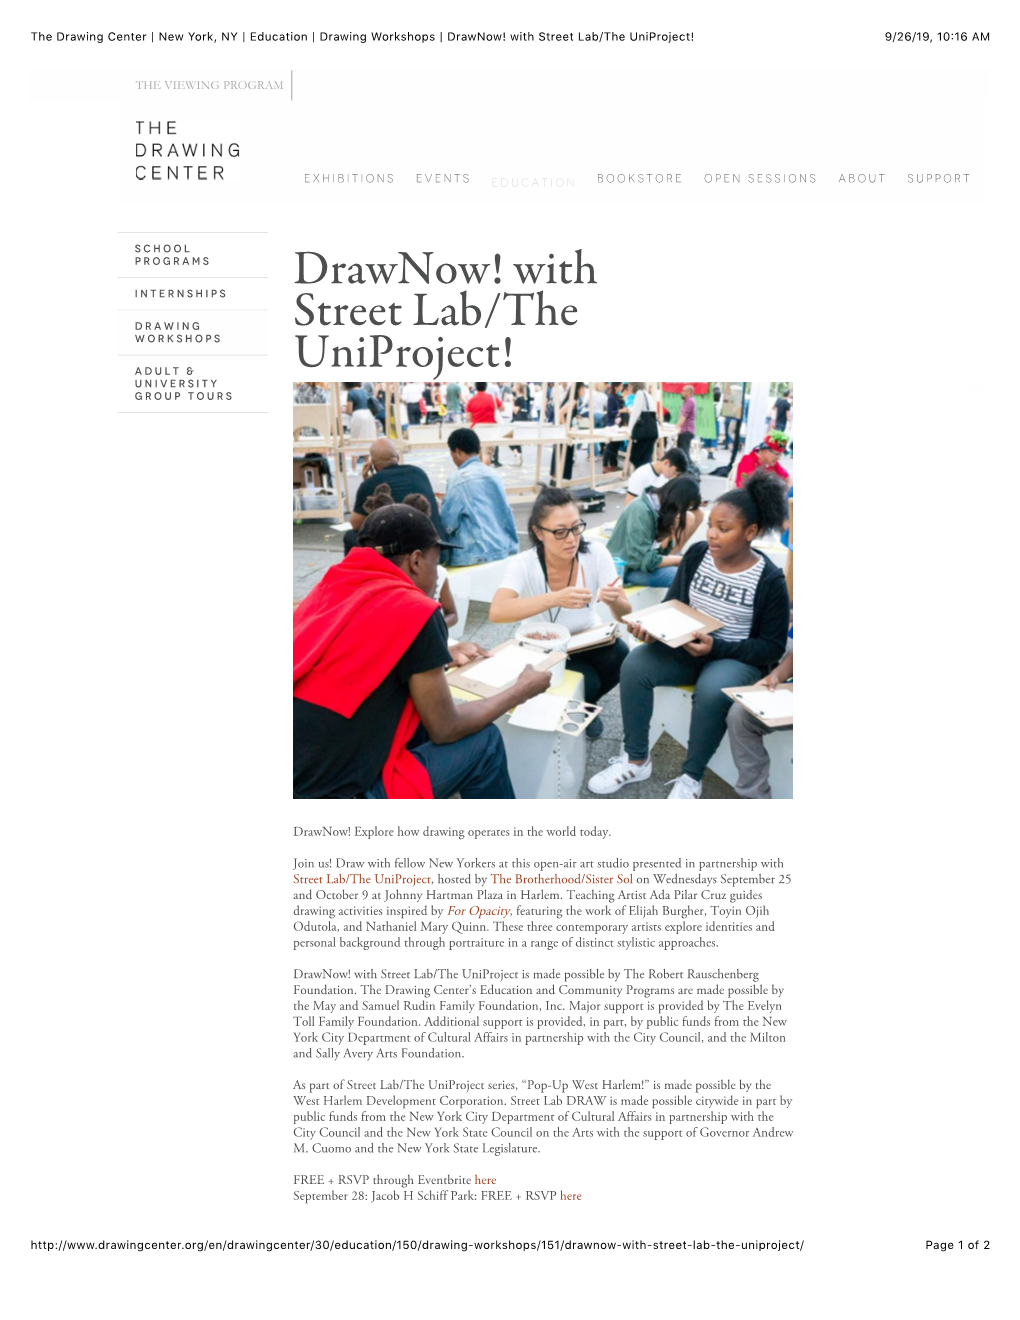 The Drawing Center | New York, NY | Education | Drawing Workshops | Drawnow! with Street Lab/The Uniproject! 9/26/19, 10�16 AM